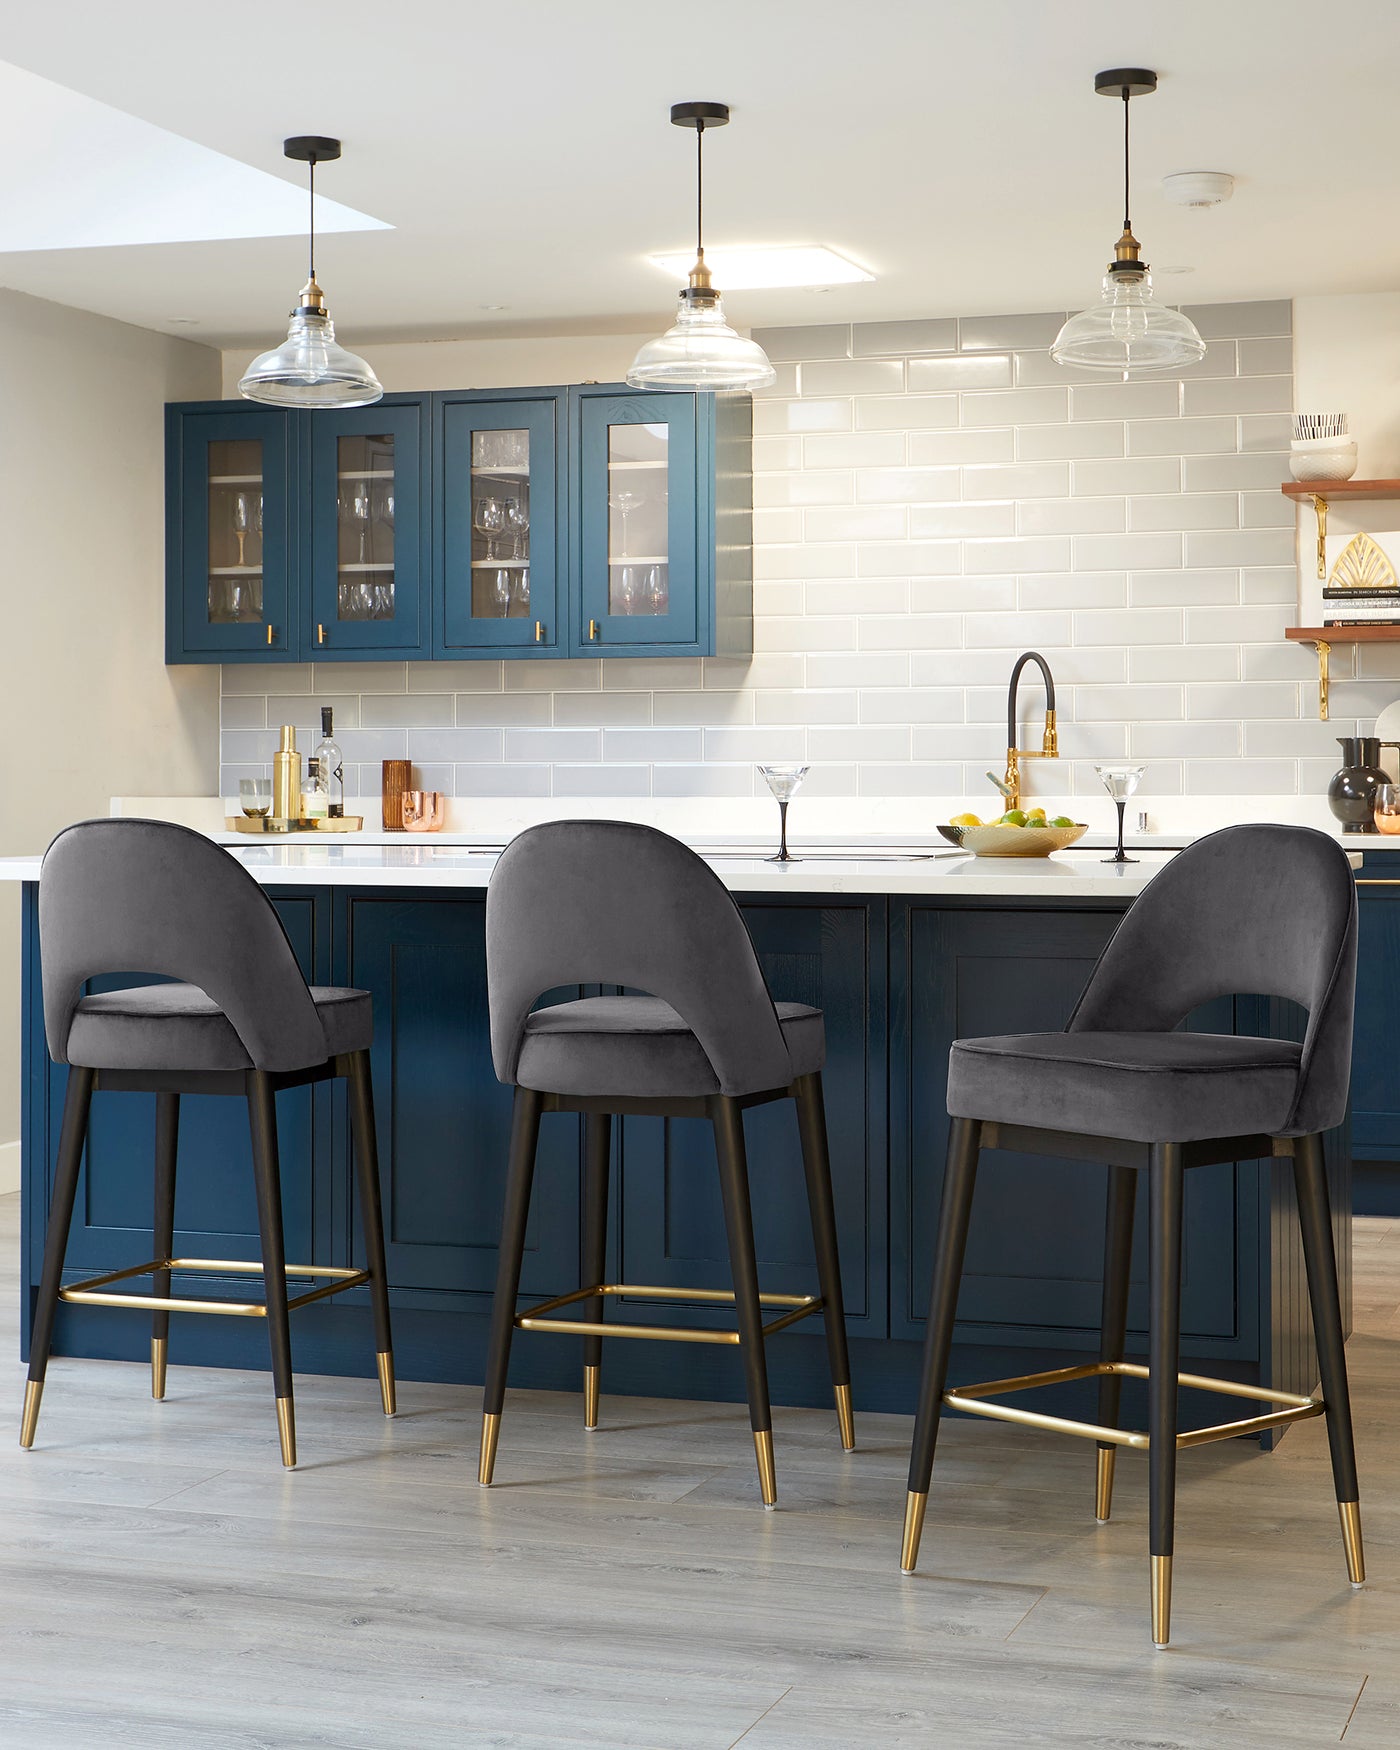 Three contemporary bar stools with plush grey upholstery and black frames accented with gold footrests, positioned at a kitchen island.